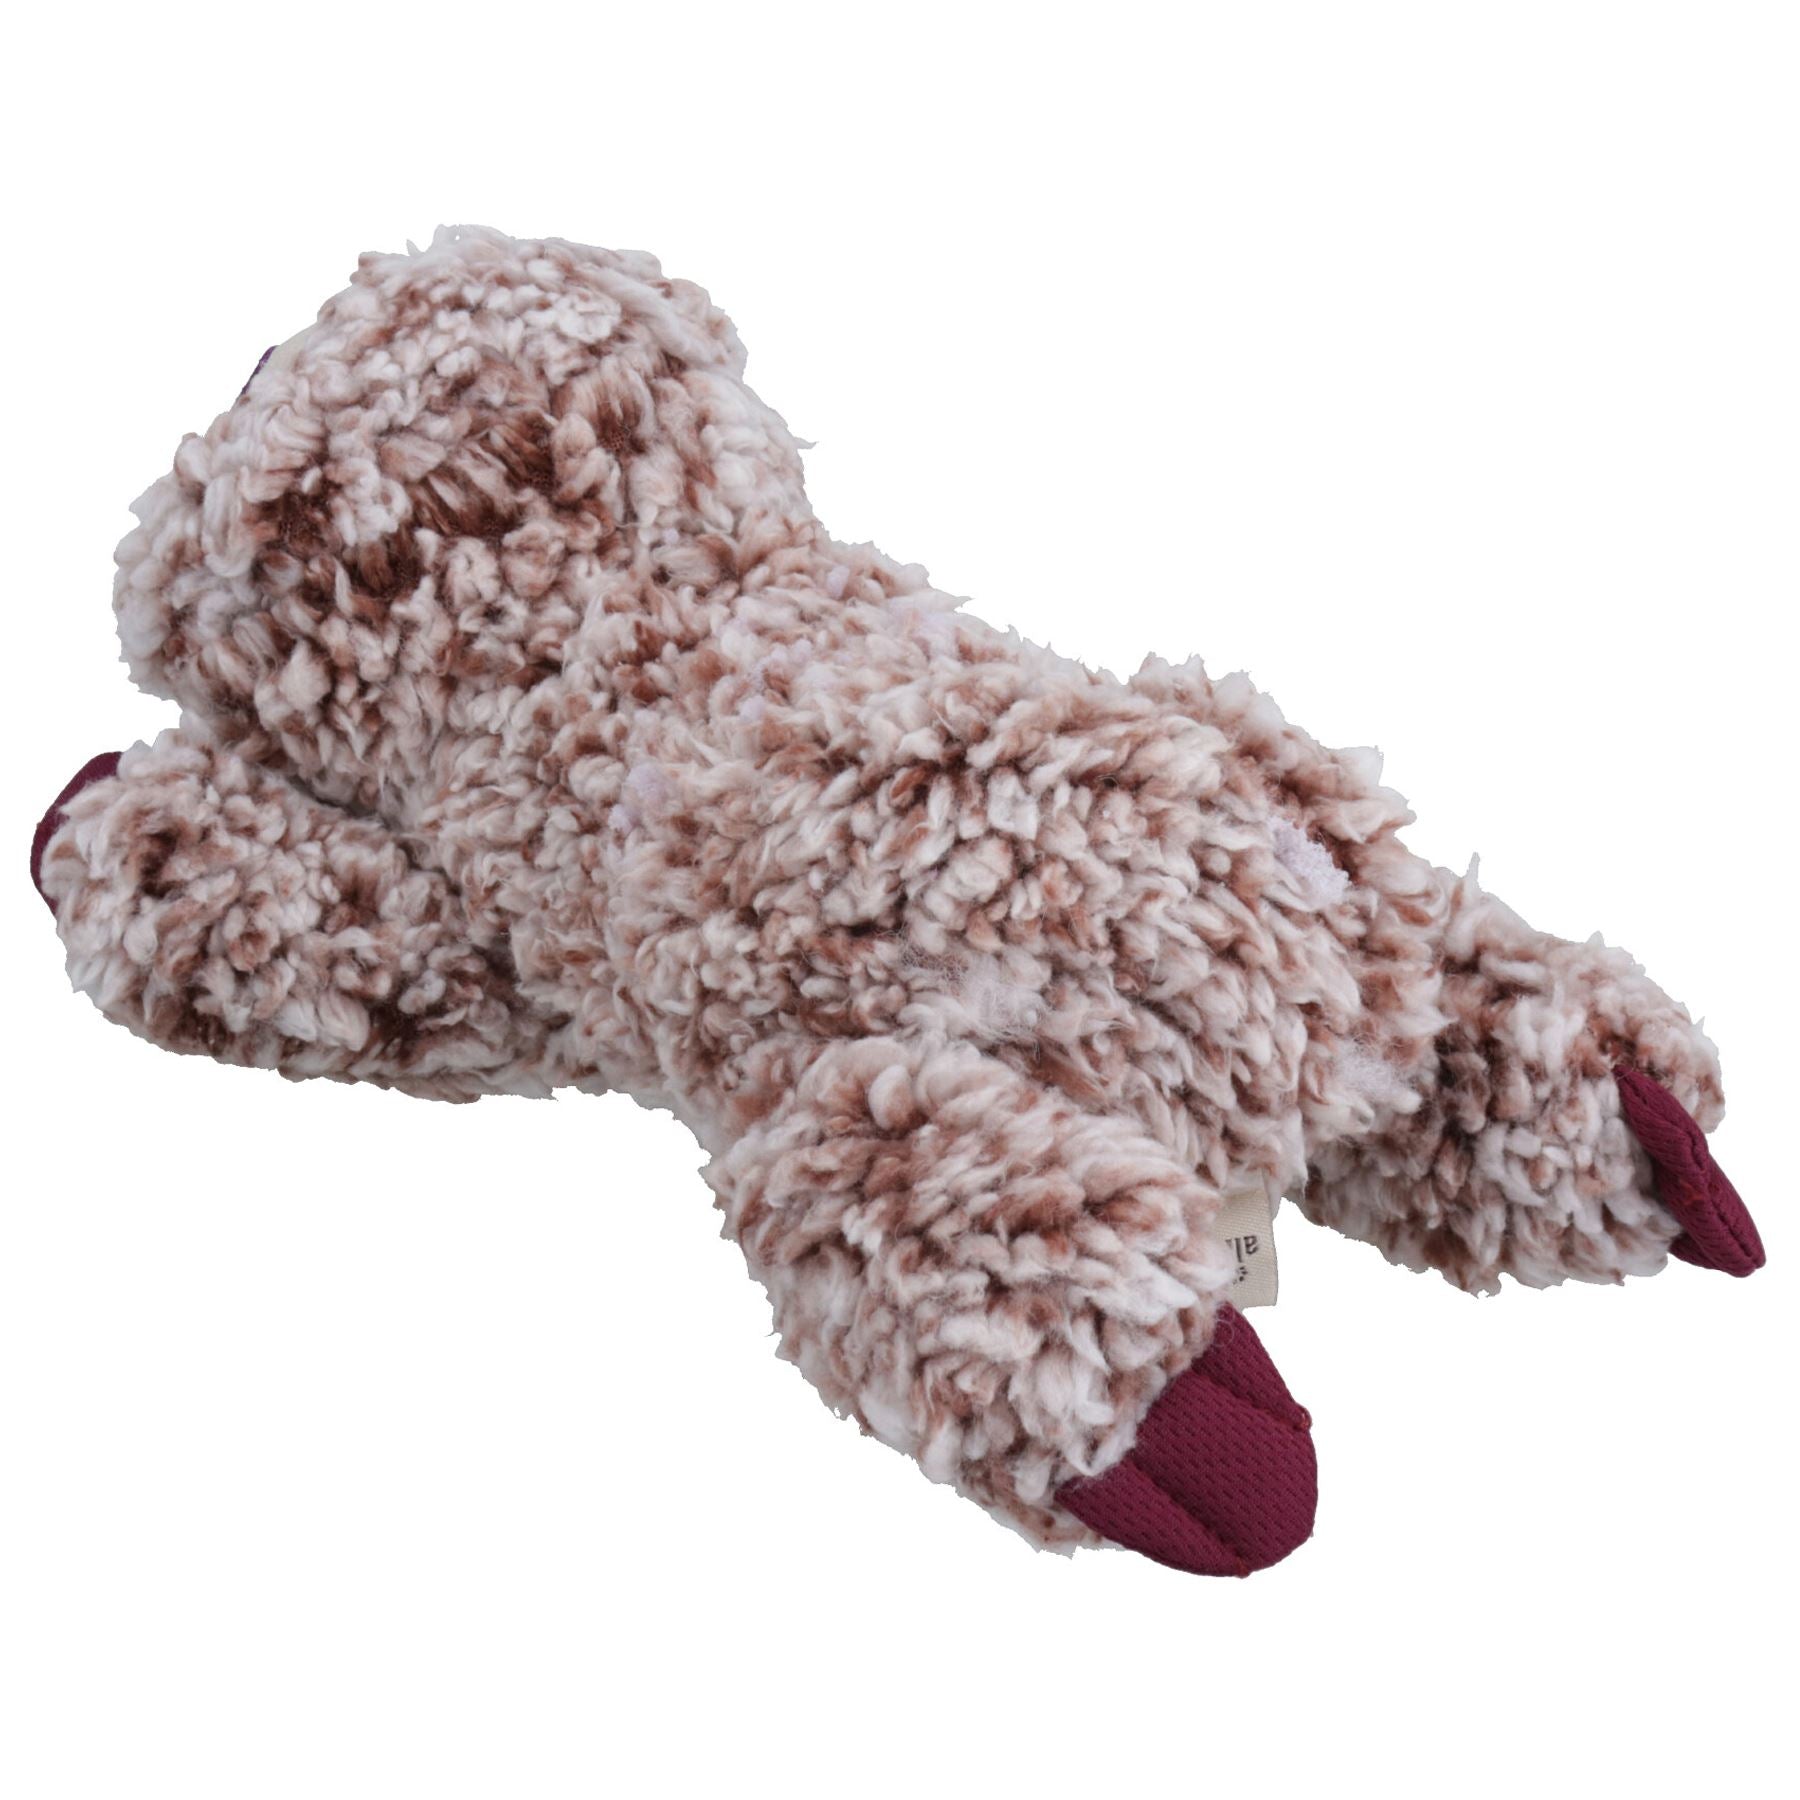 Calming Plush Calming Lavender Scent Sloth Separation Anxiety Dog Toy Gift